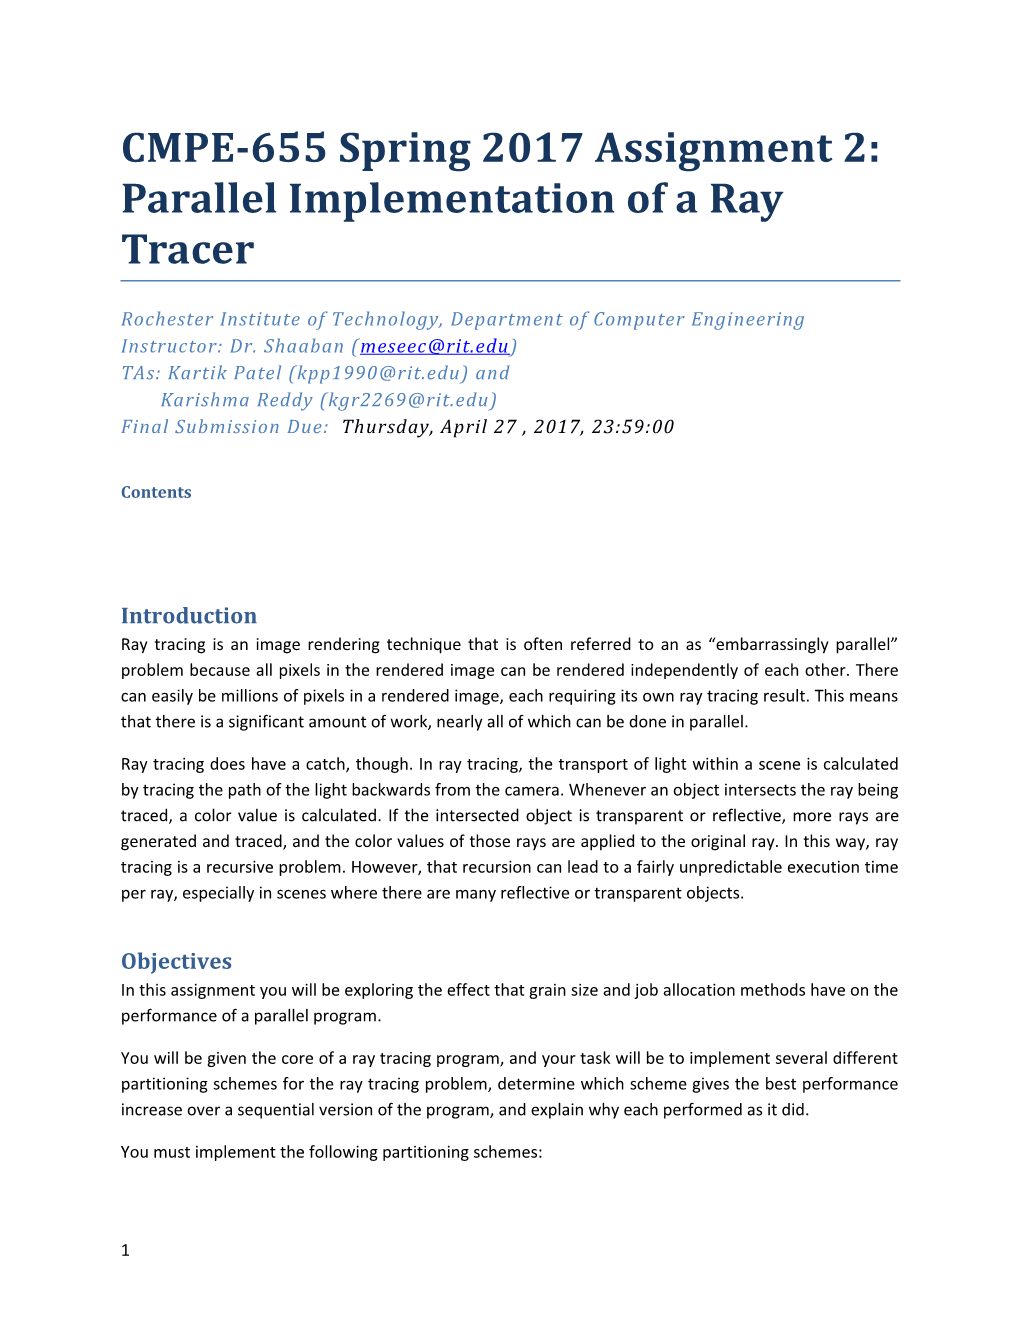 CMPE-655Spring 2017 Assignment 2: Parallel Implementation of a Ray Tracer